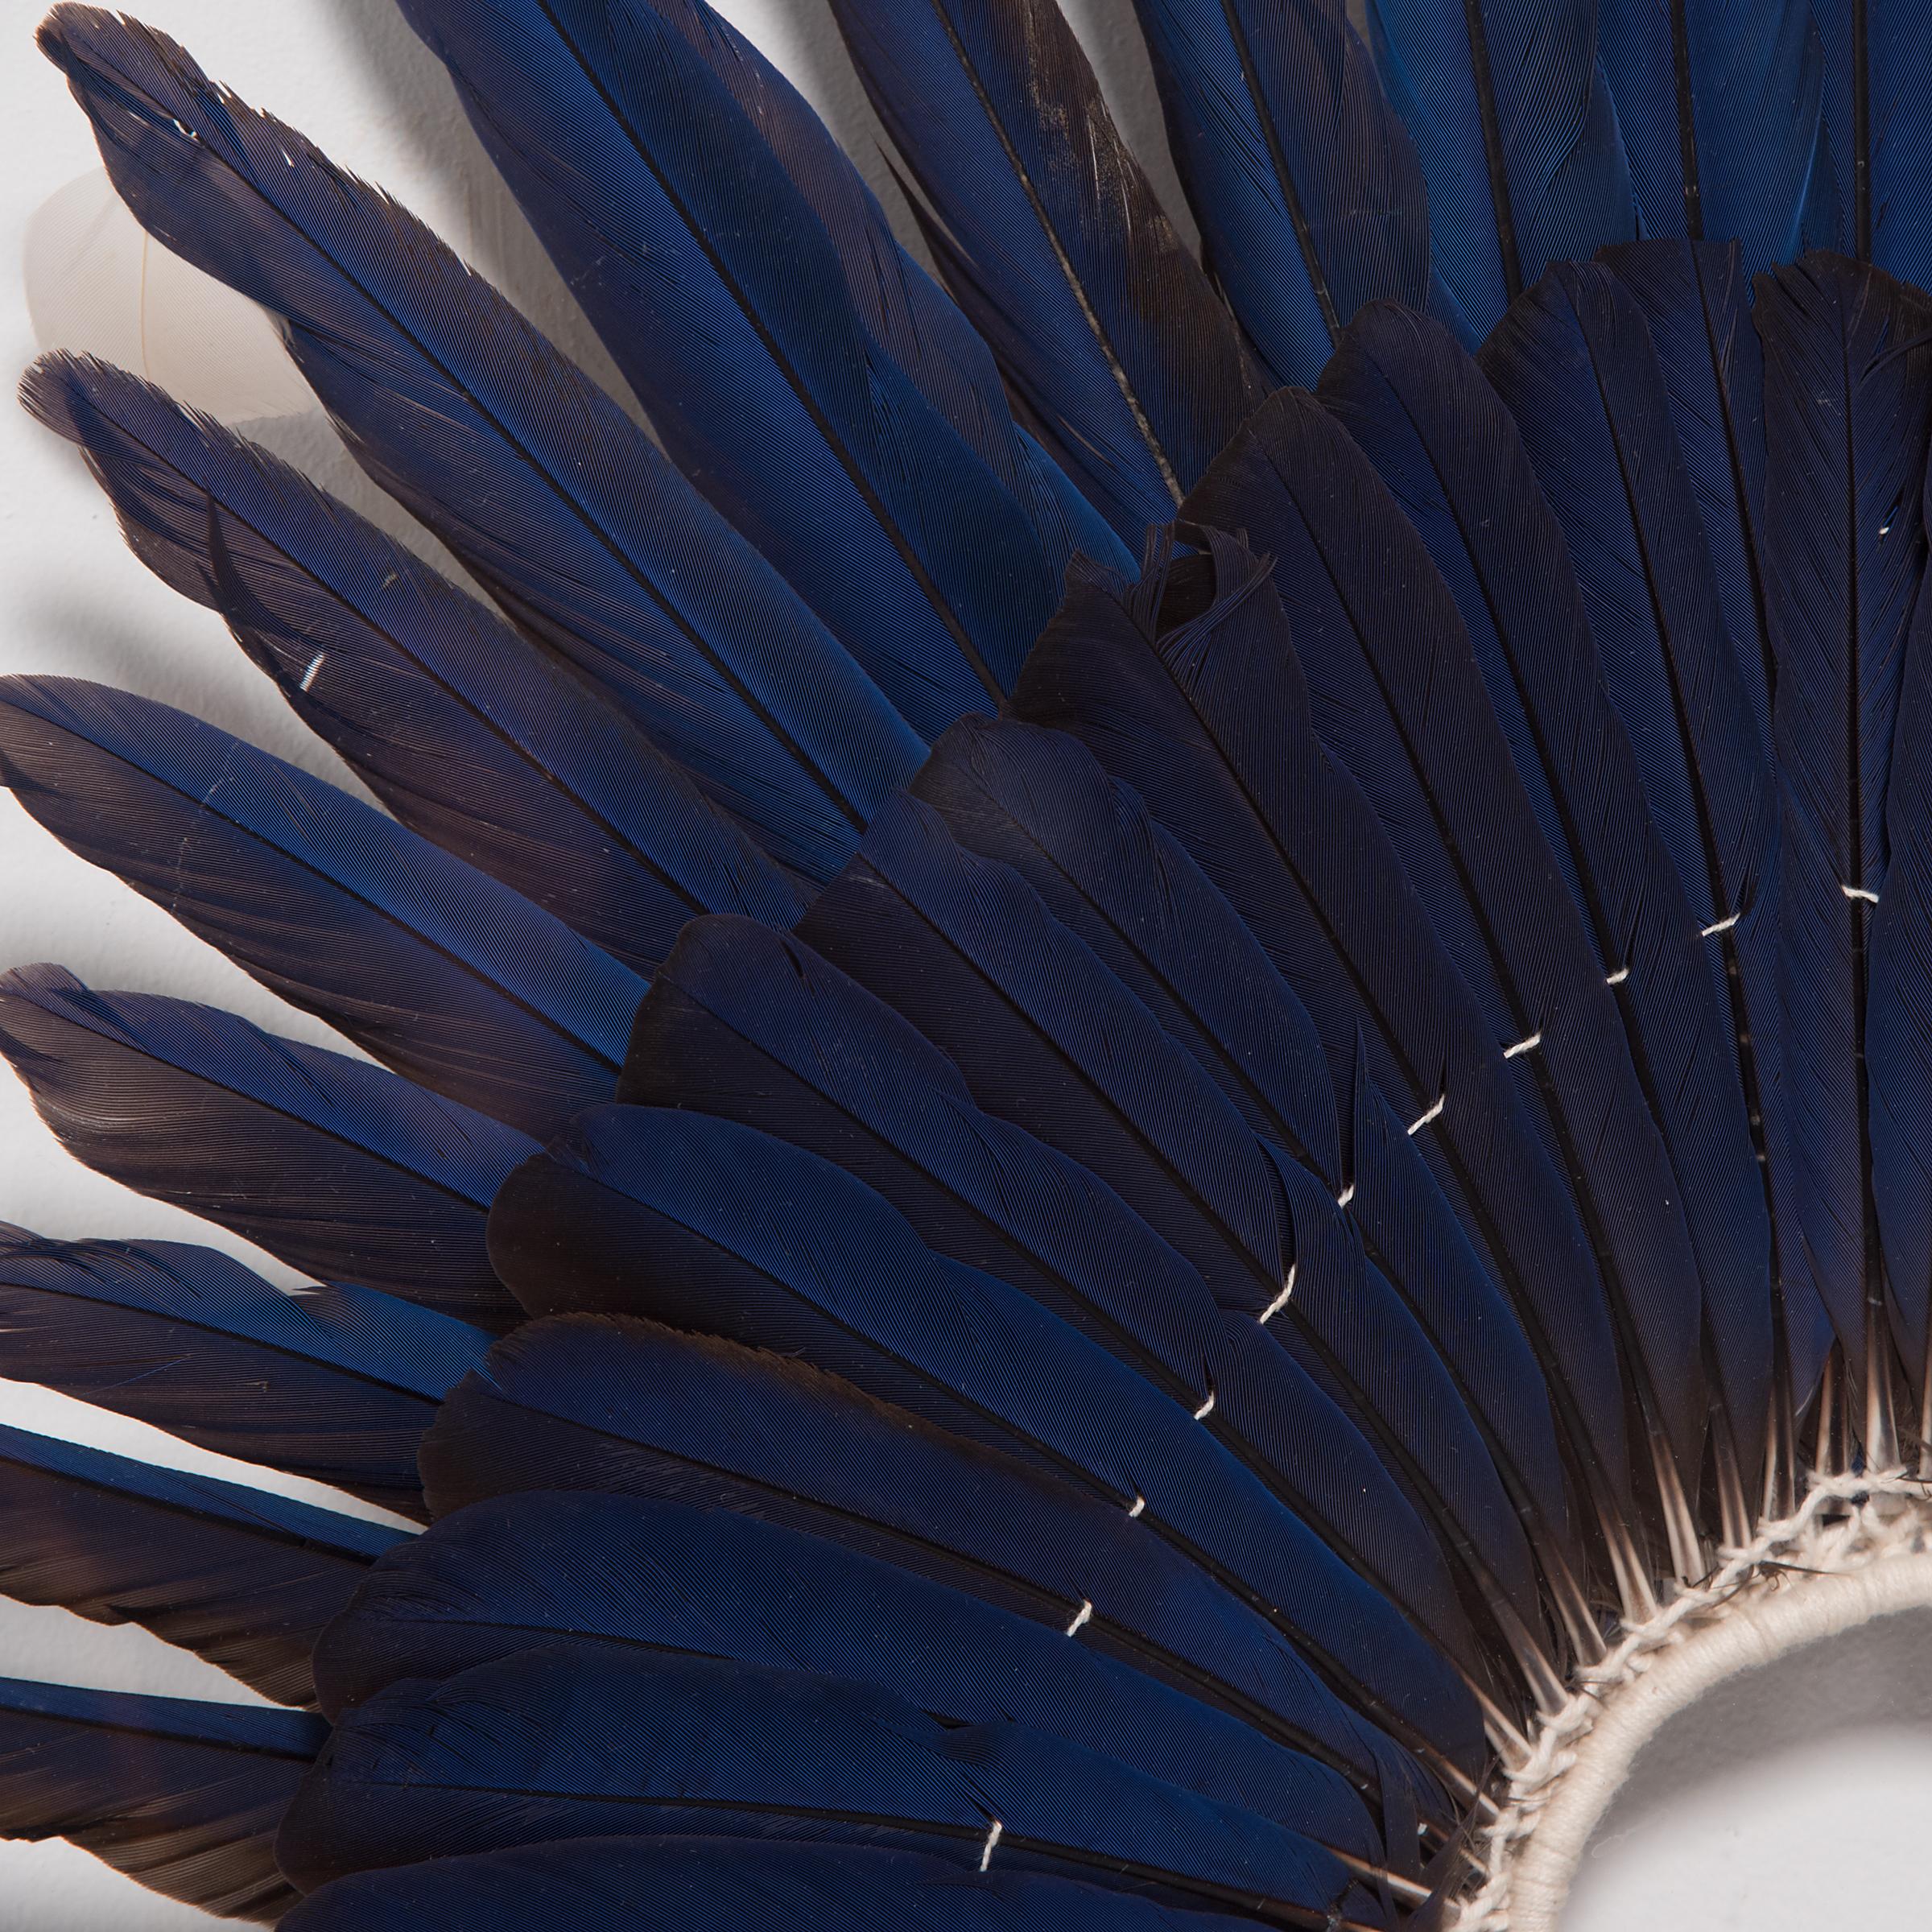 A breathtaking display of color and texture, this blue feather headdress is a ceremonial headpiece of the Kayapo people, an indigenous group of the Amazon basin. Sourced from the hyacinth macaw, the brilliant blue feathers radiate outwards from the